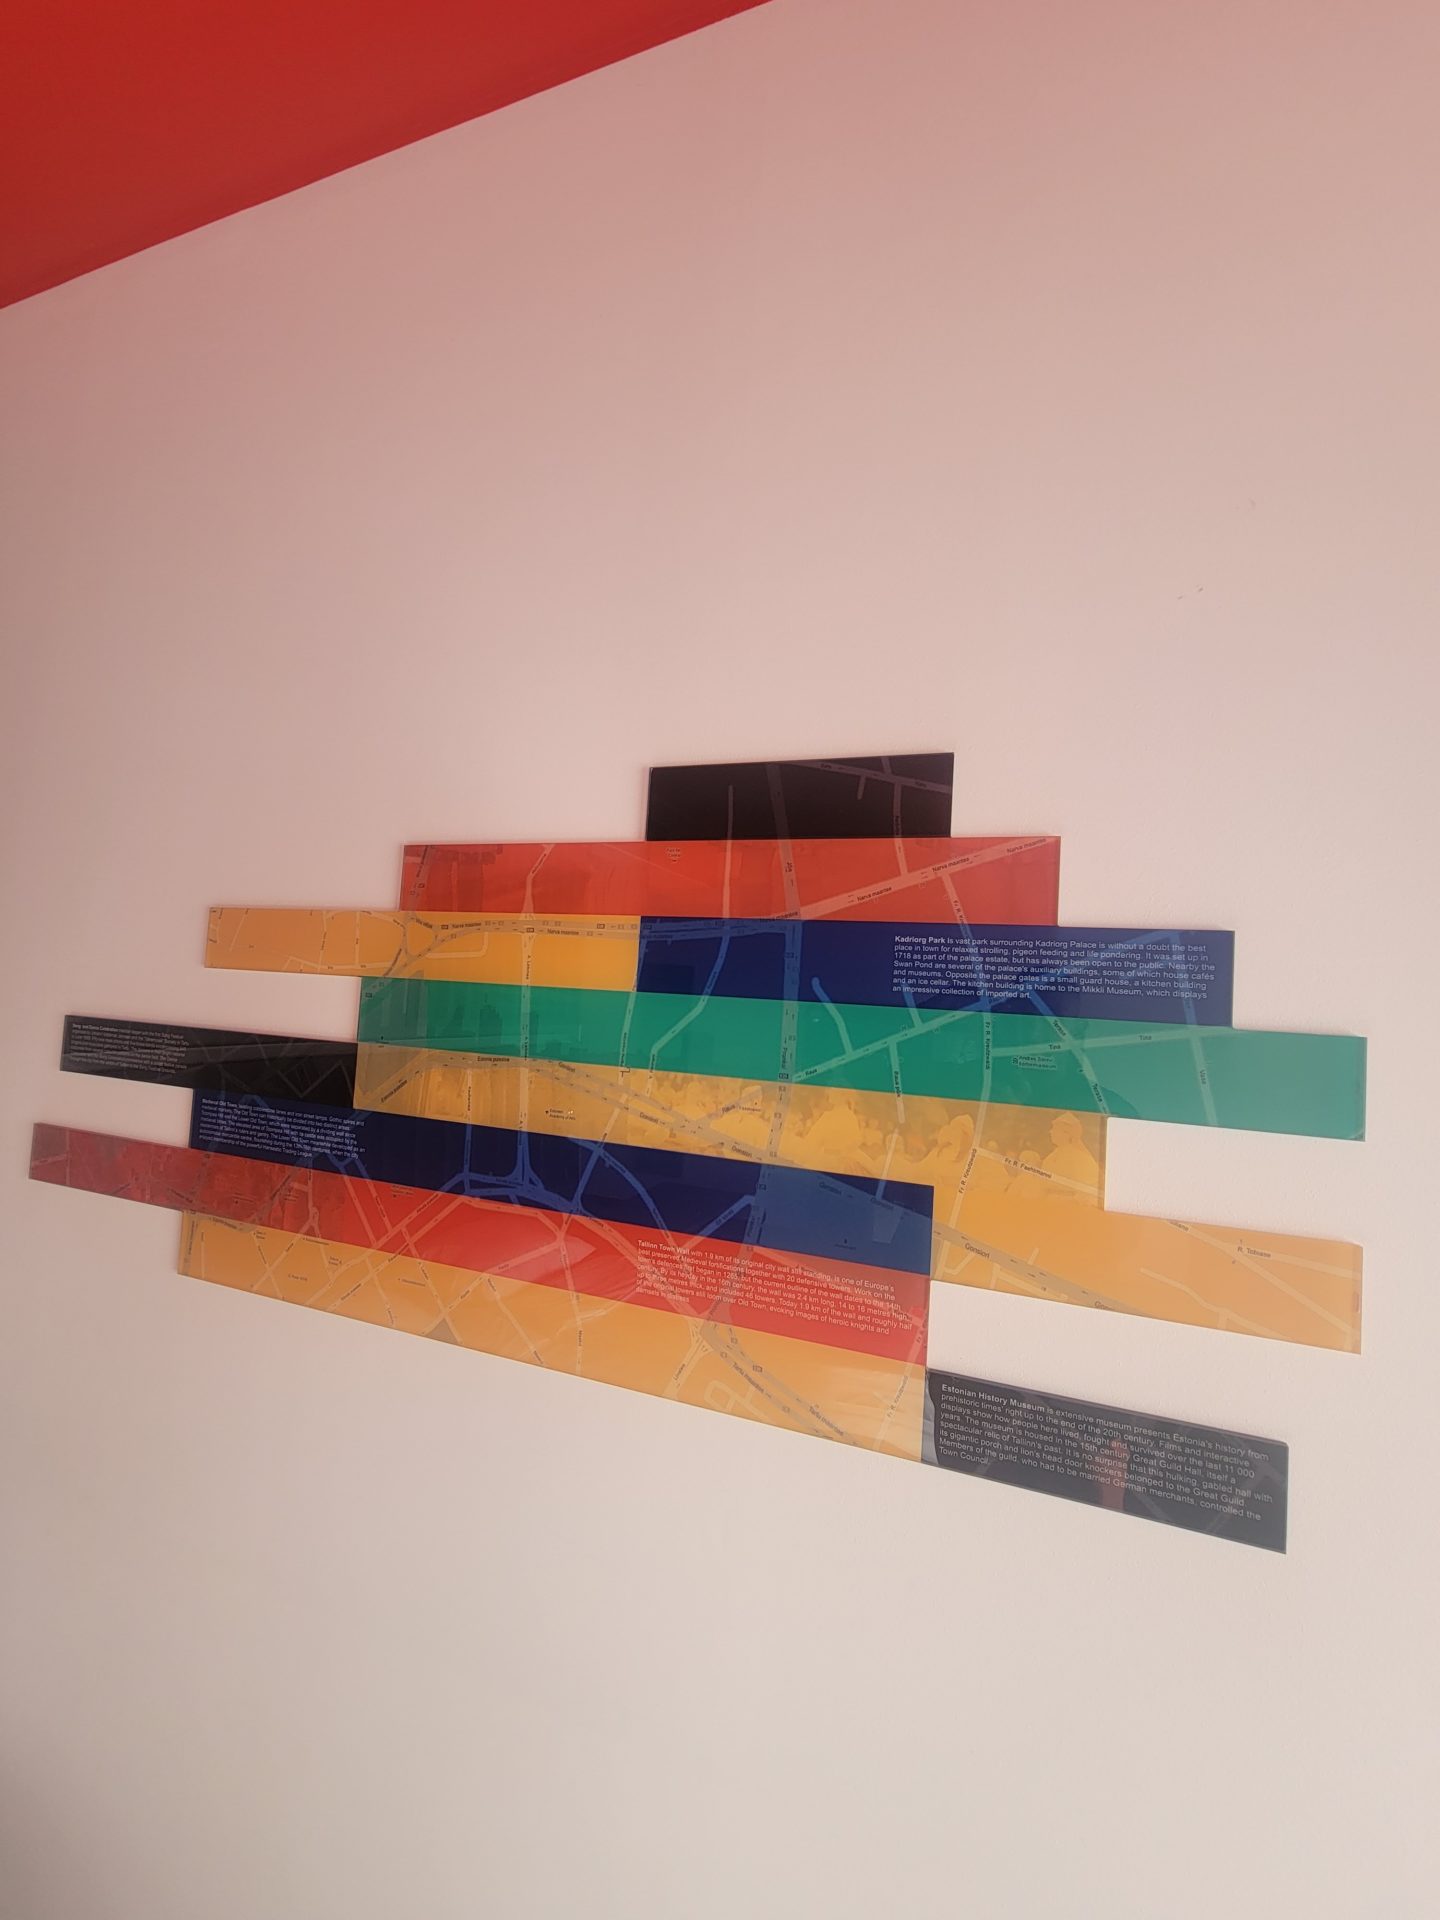 a group of colorful rectangular objects on a white wall